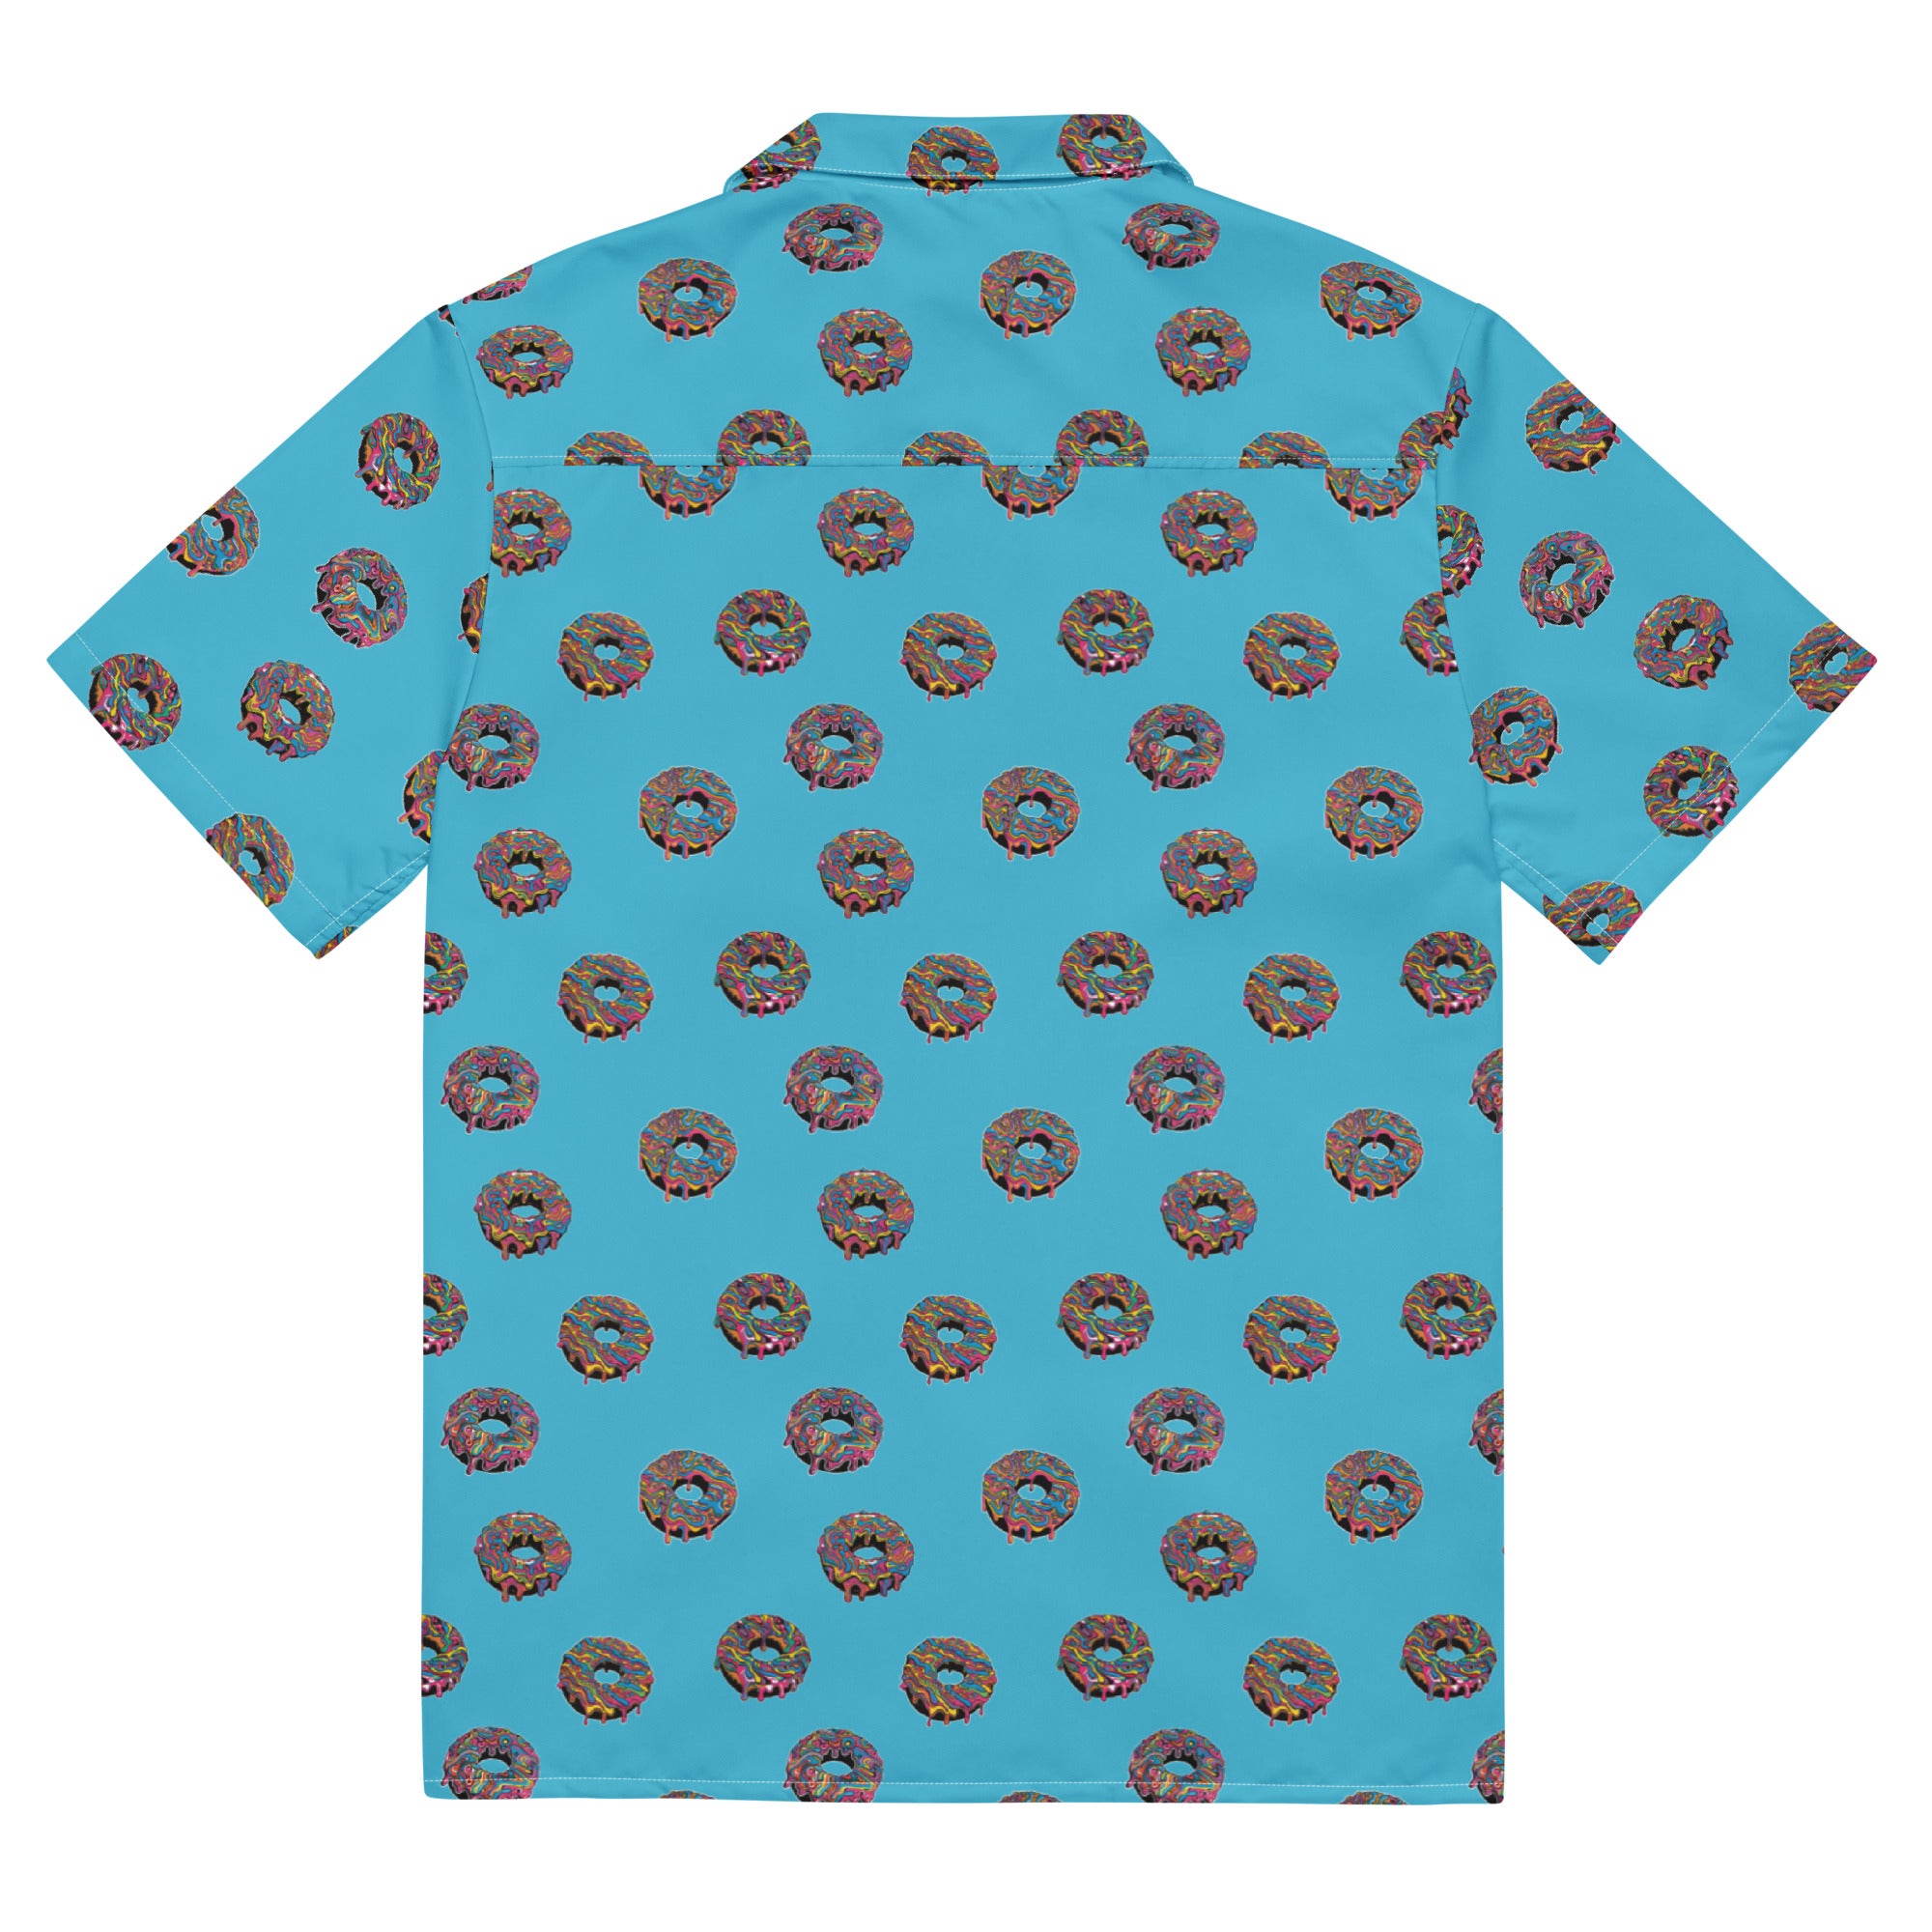 Psychedelic Donut Button Up Shirt